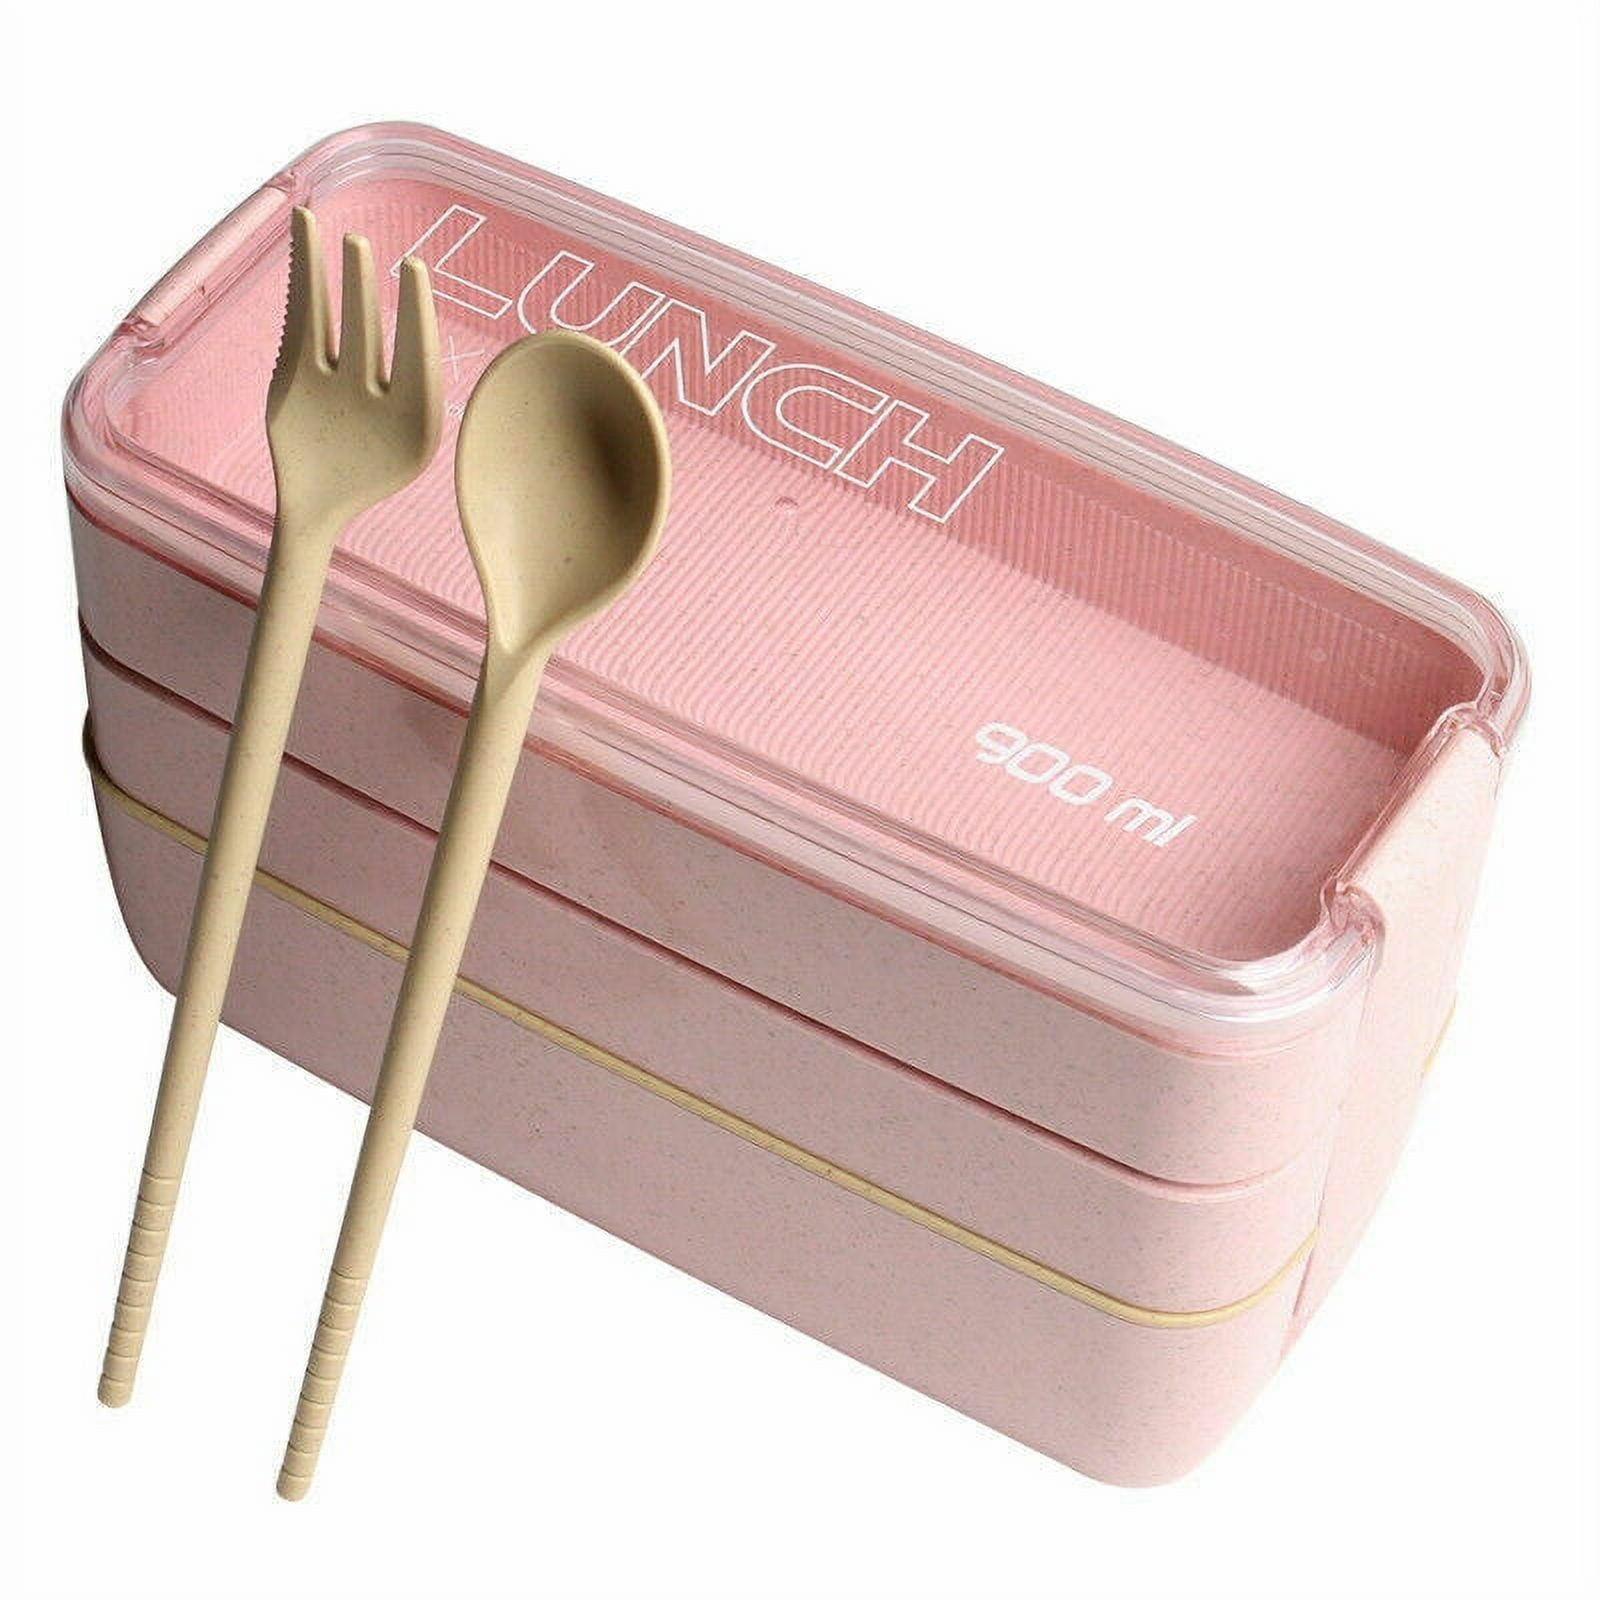 Lieonvis Stackable Bento Box Japanese Lunch Box Kit with Spoon & Fork,3-In-1 Compartment Stackable Bento Box for Kids & Adults,Wheat Straw Lunch